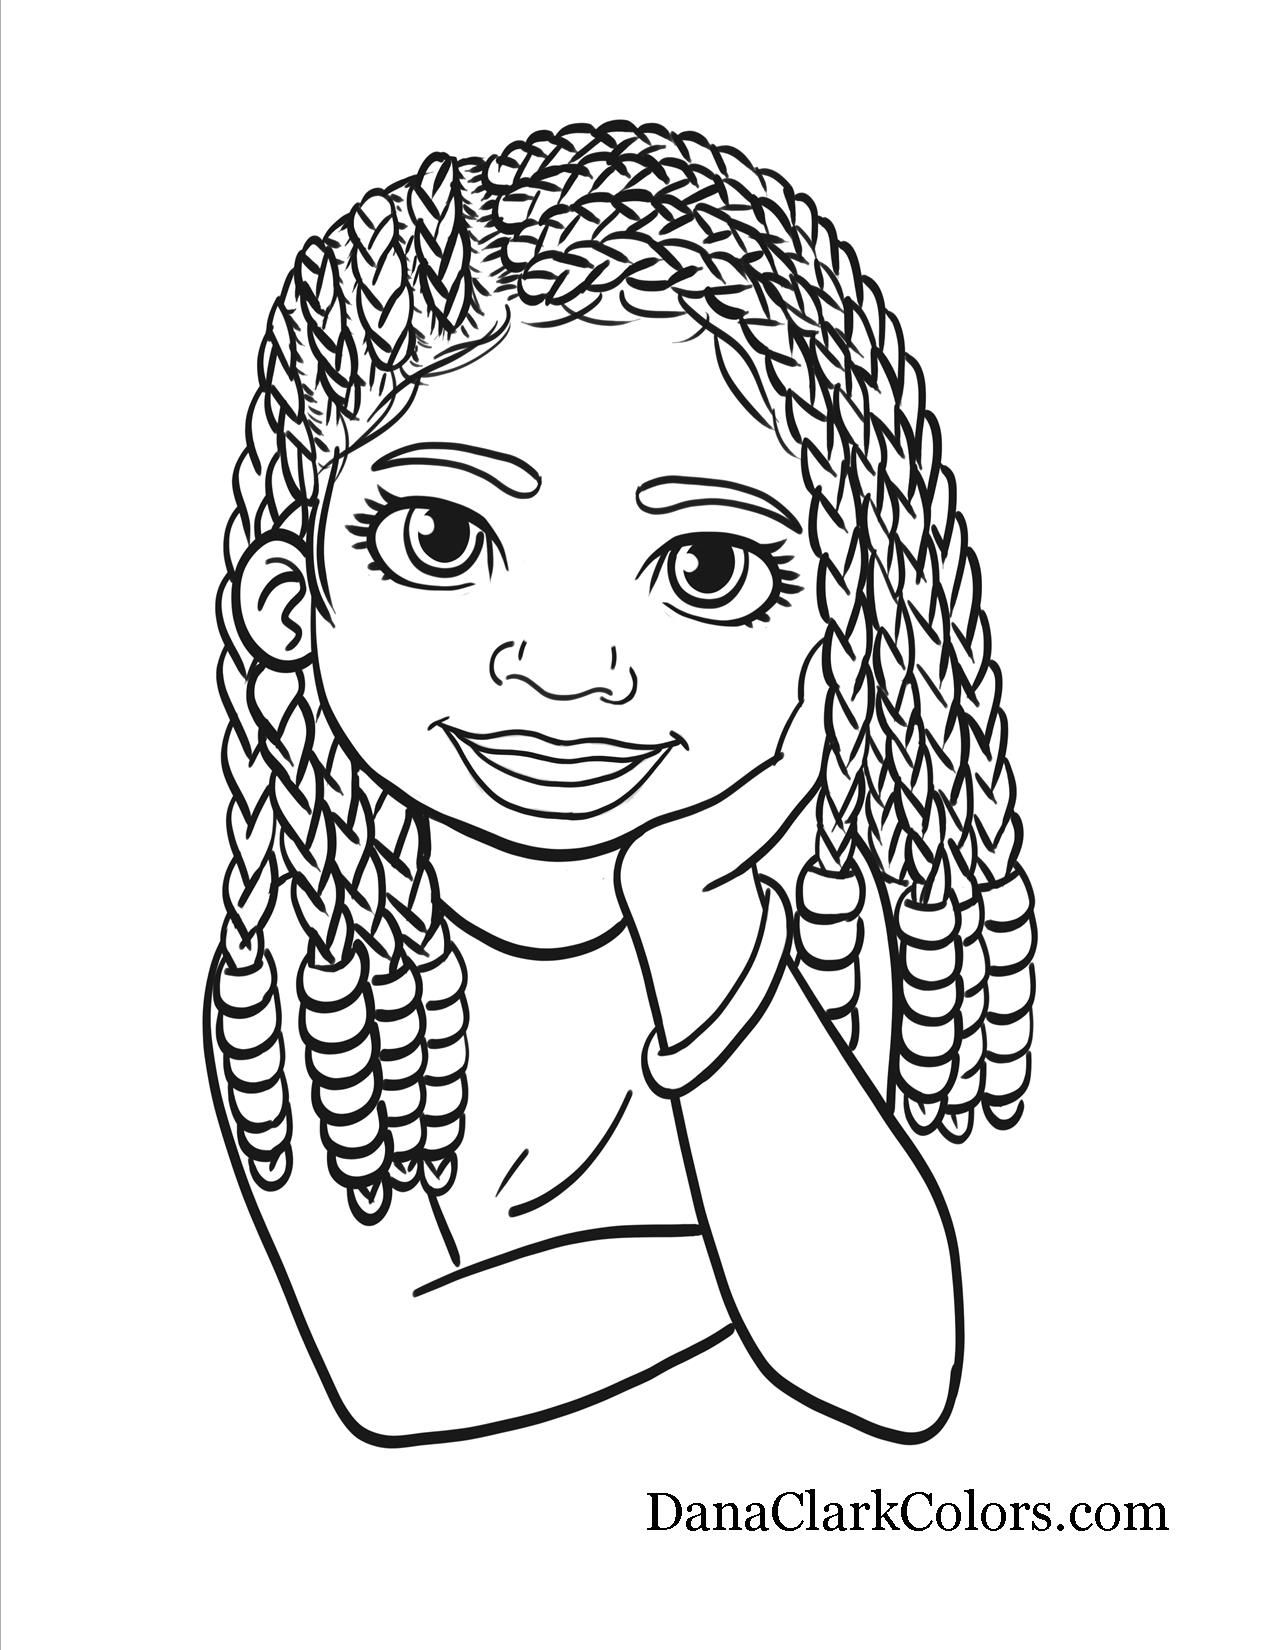 Free Coloring Pages - DanaClarkColors.com | People Coloring Pages